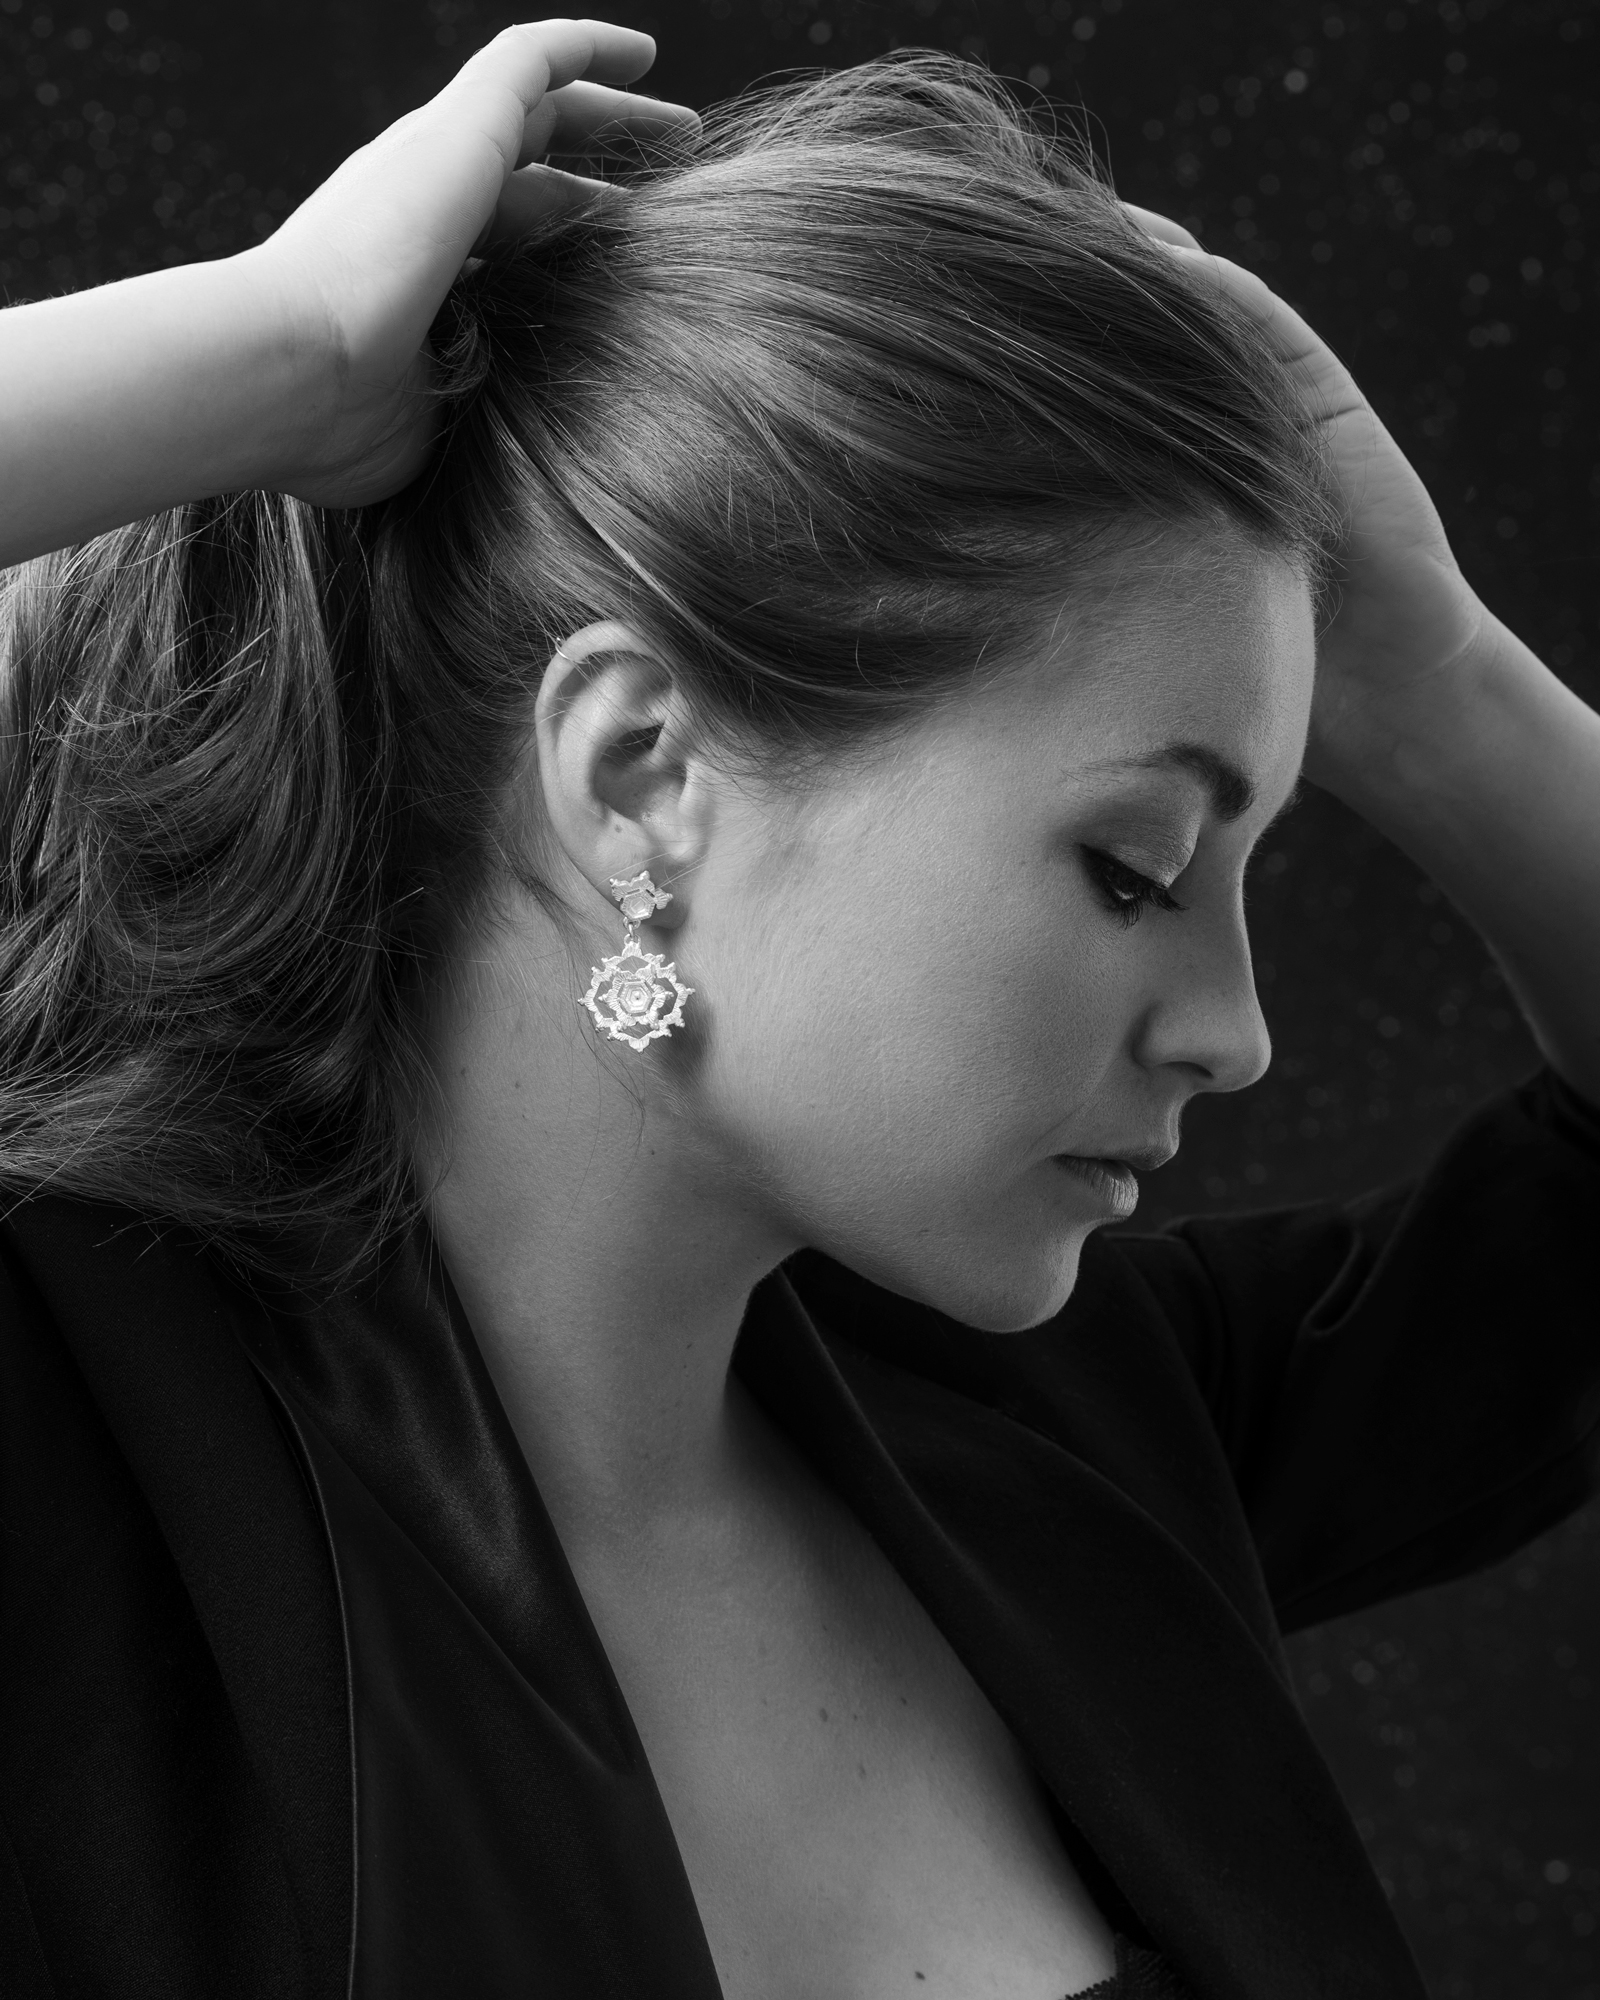 A beauty headshot of model. Image is close up showing model's side profile. she has her hands up and pulls her hair back while looking down. The image is in black and white.